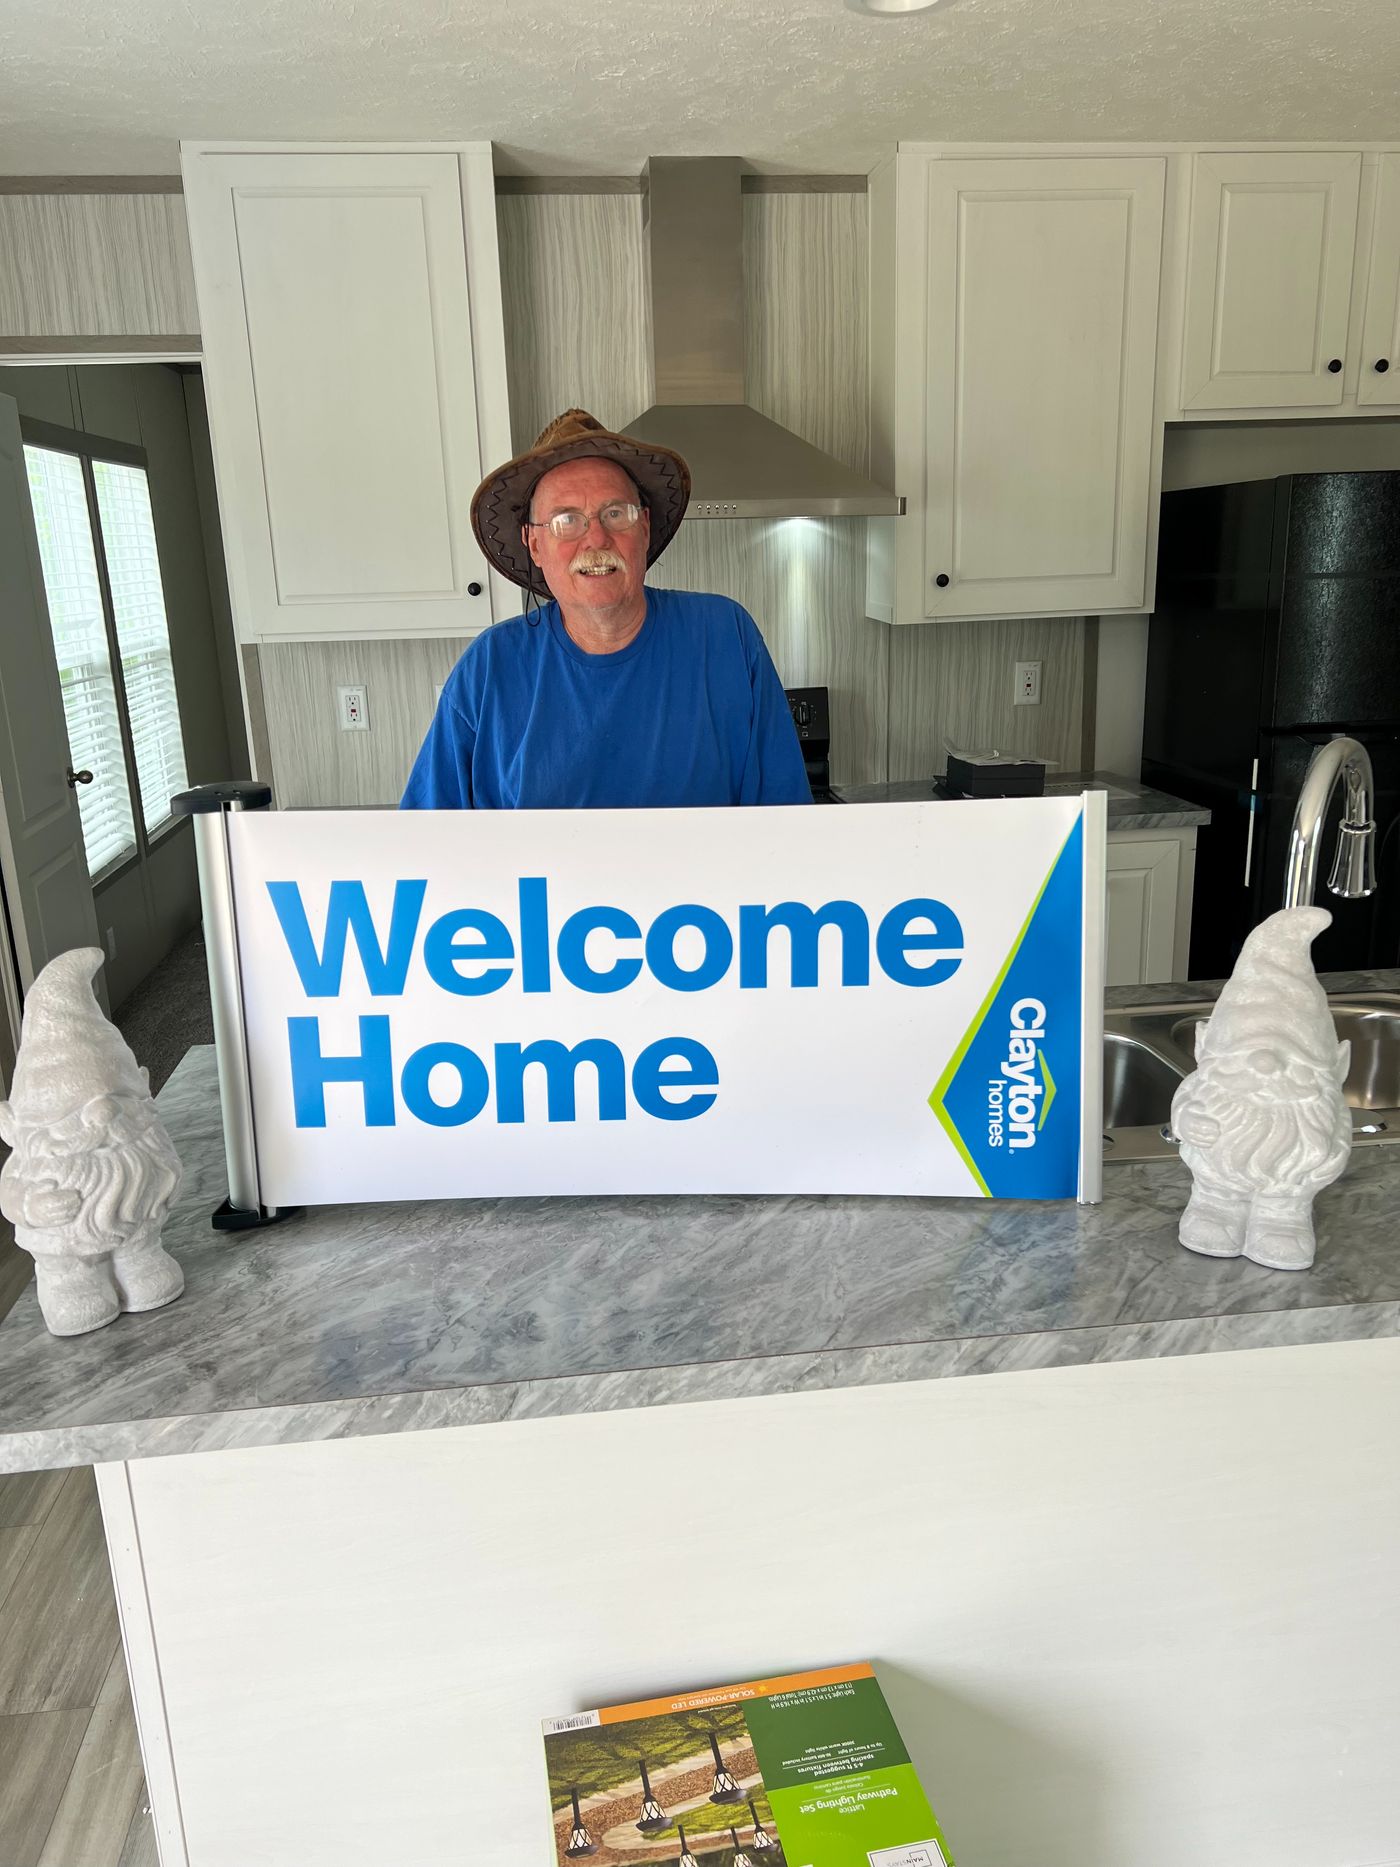 DIANE H. welcome home image